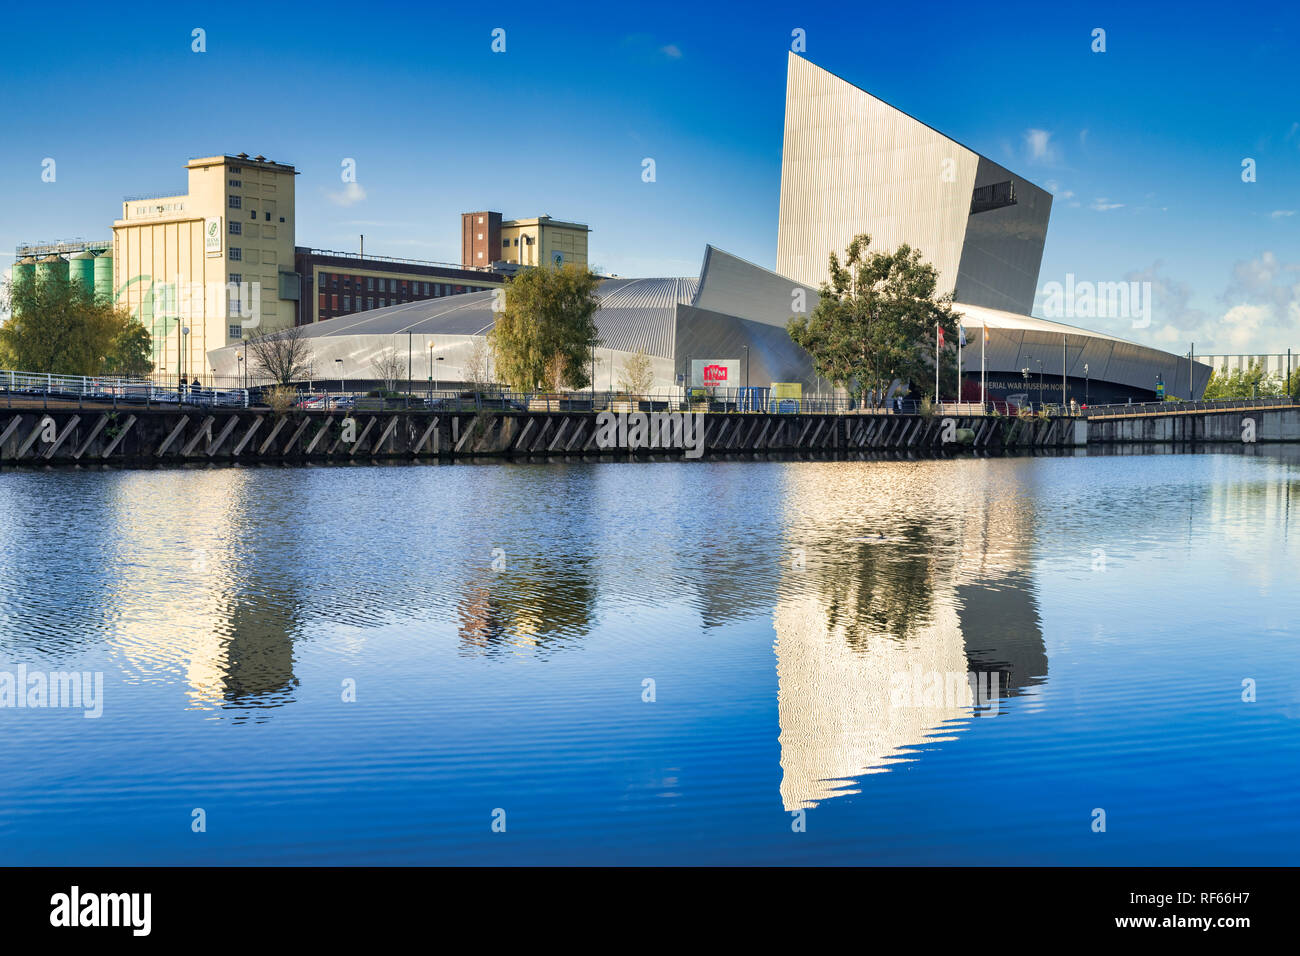 November 2 2018: Salford Quays, Manchester, UK - Imperial War Museum North, reflected in the deep blue water of the Manchester Ship Canal, on a beauti Stock Photo